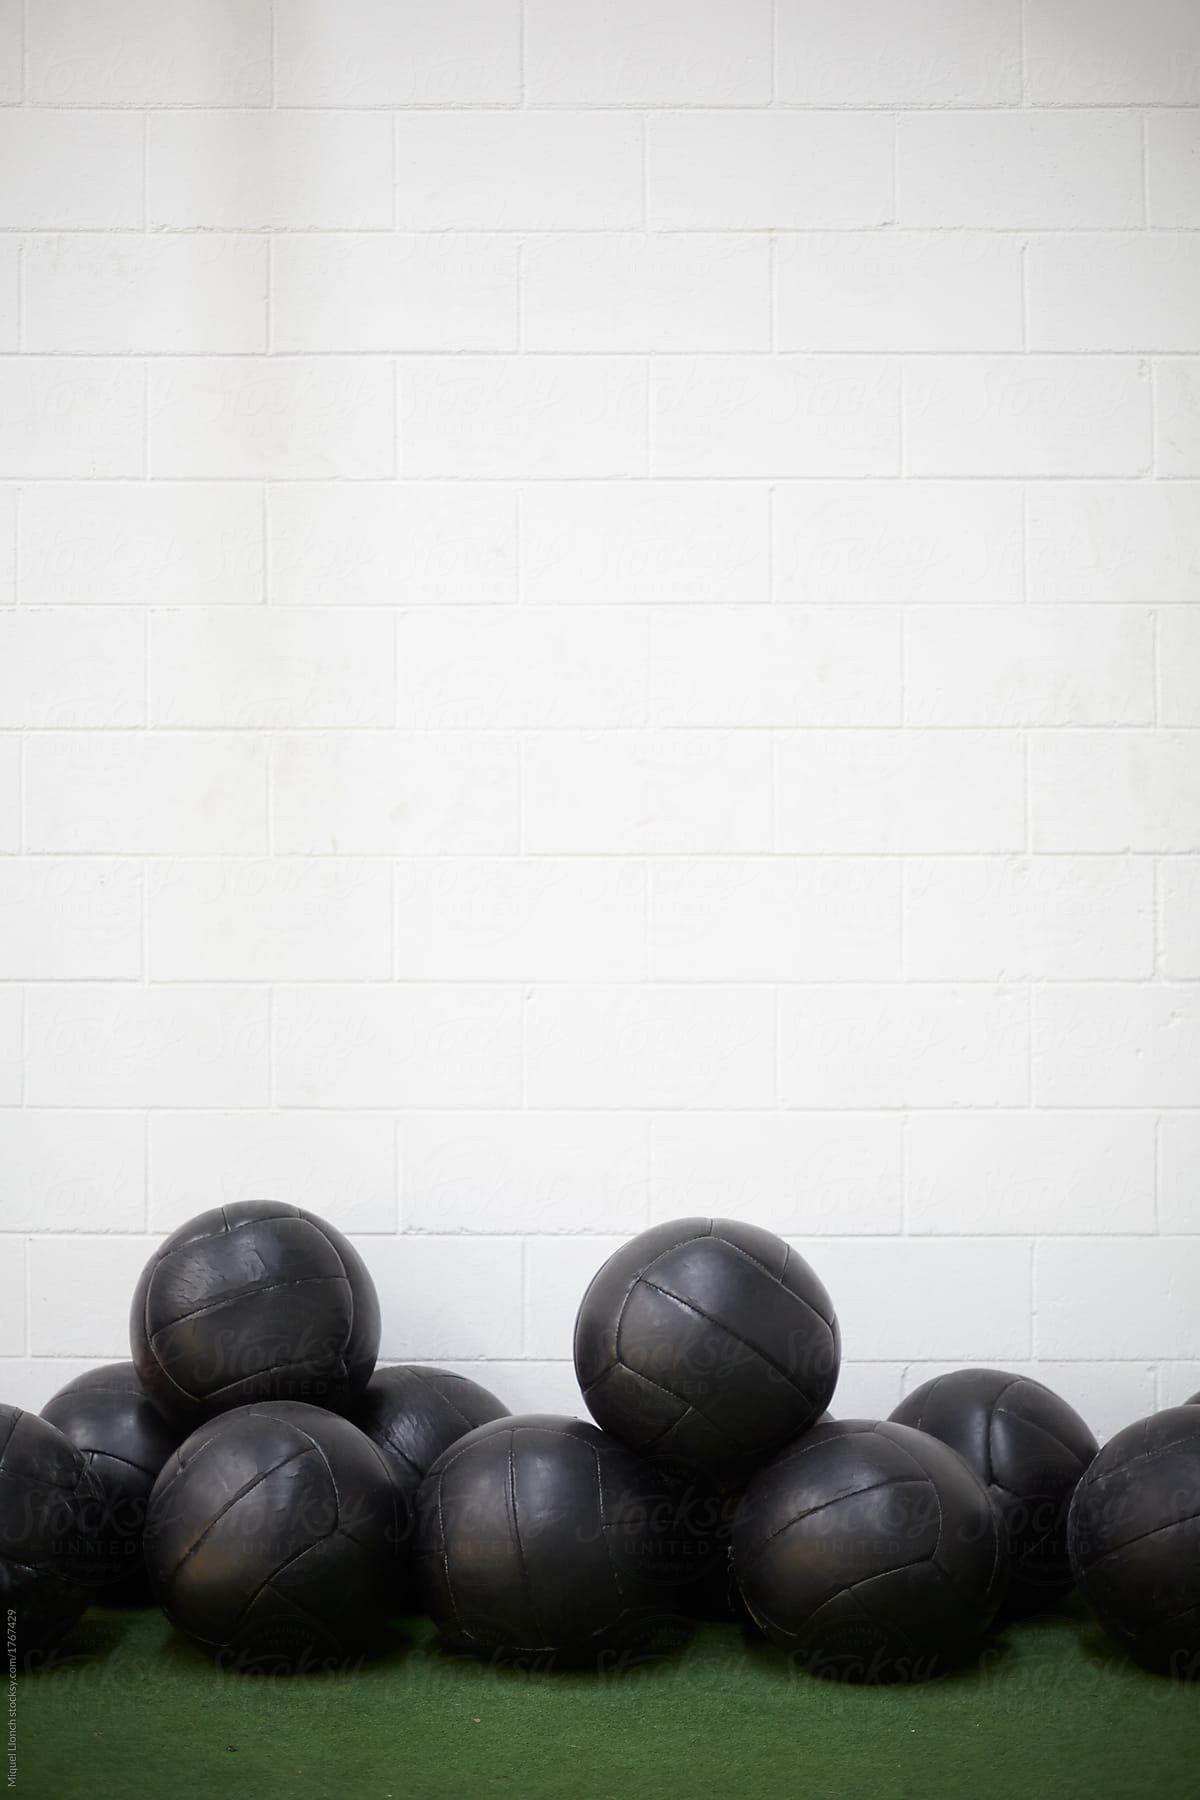 Group of weight balls for exercises in a fitness club or gym